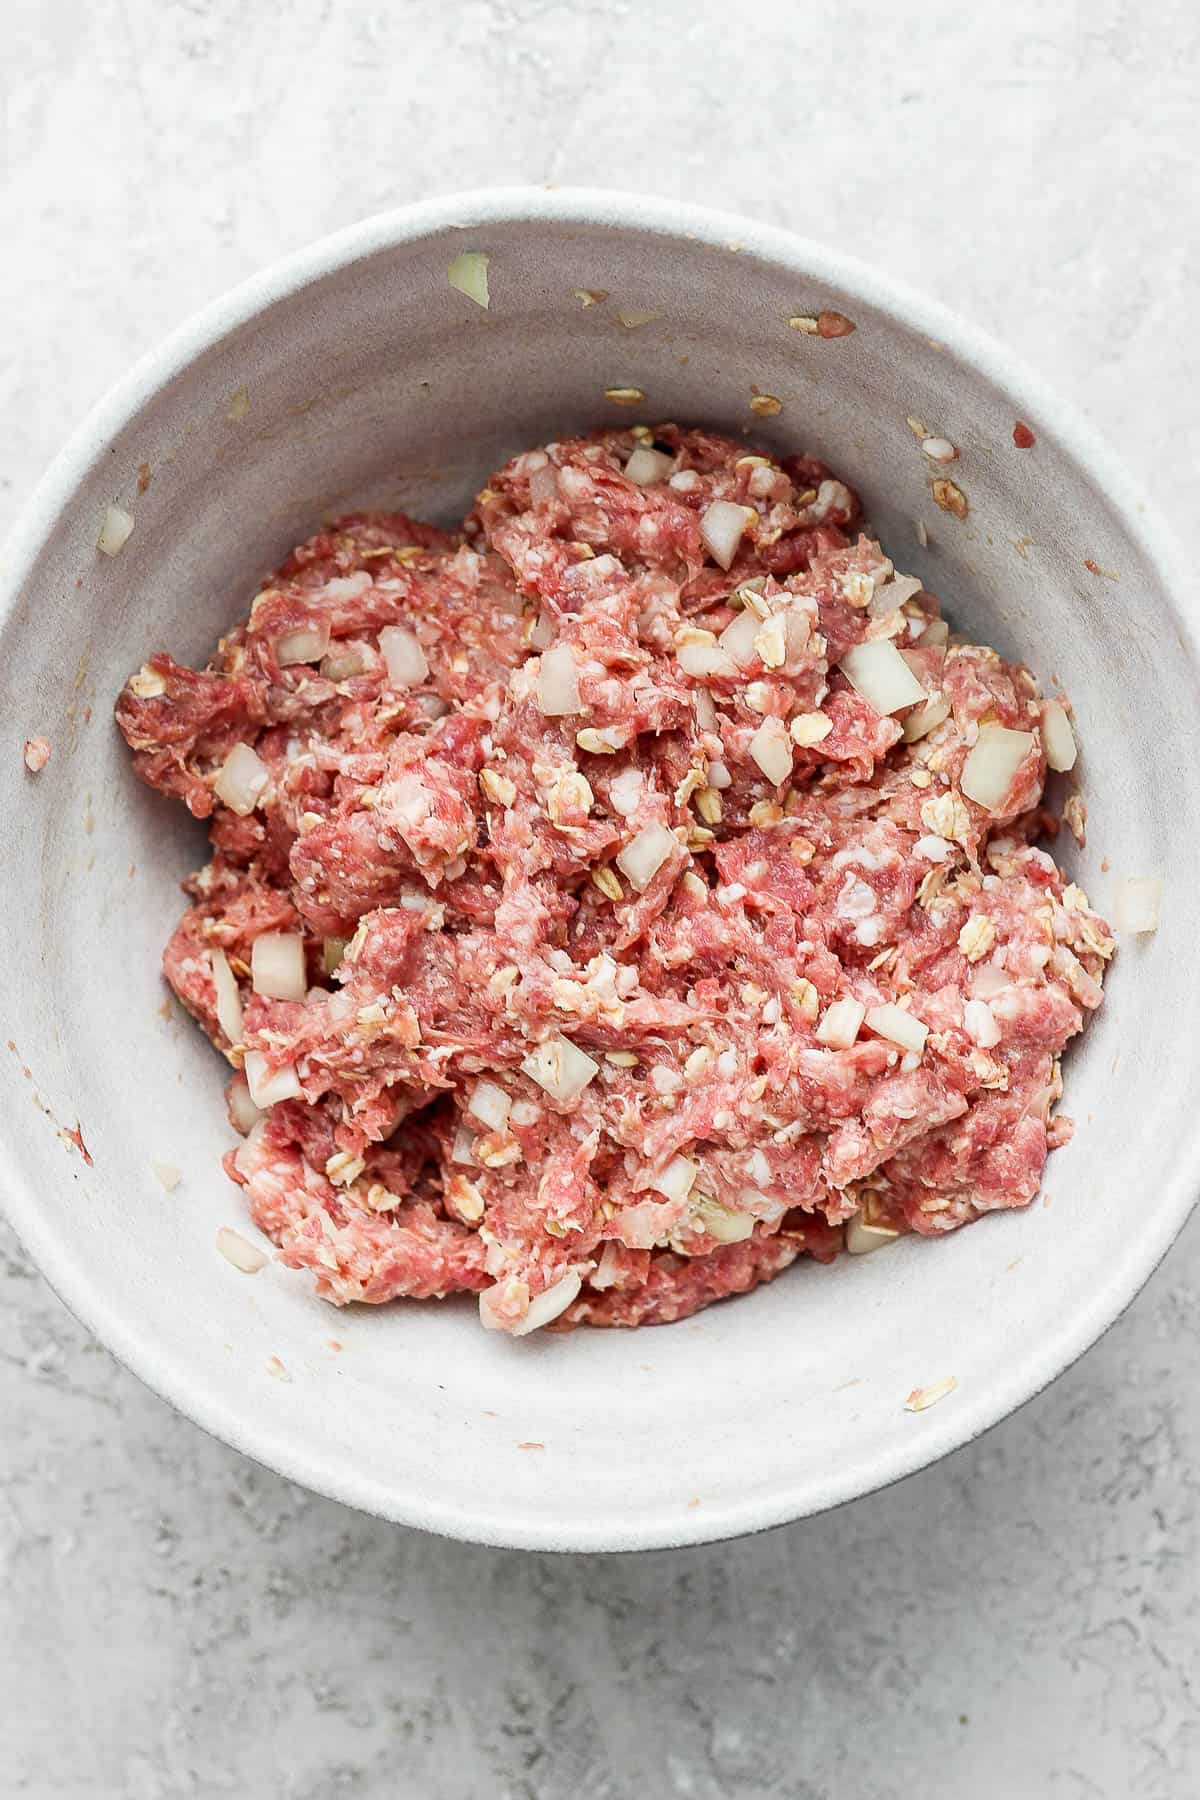 Meatloaf ingredients all mixed together in a bowl.